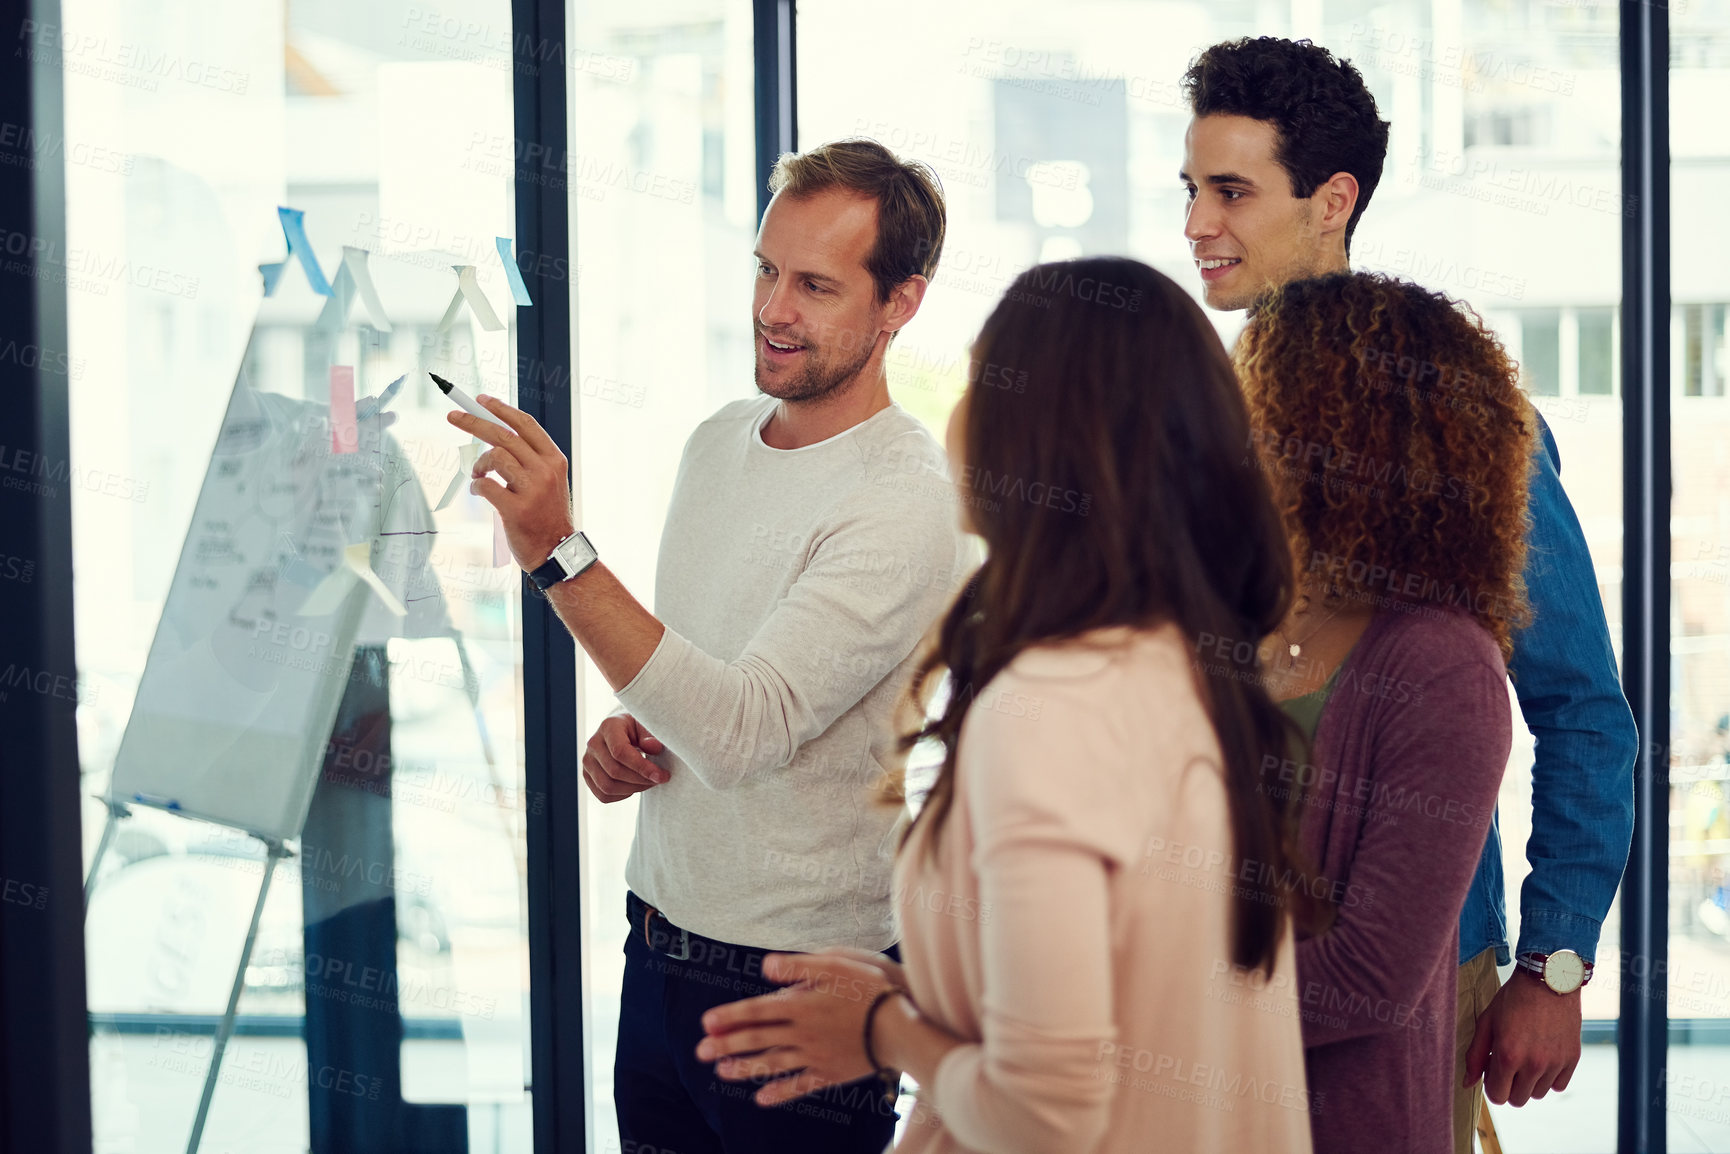 Buy stock photo Cropped shot of a group of young designers brainstorming with notes on a glass wall in an office